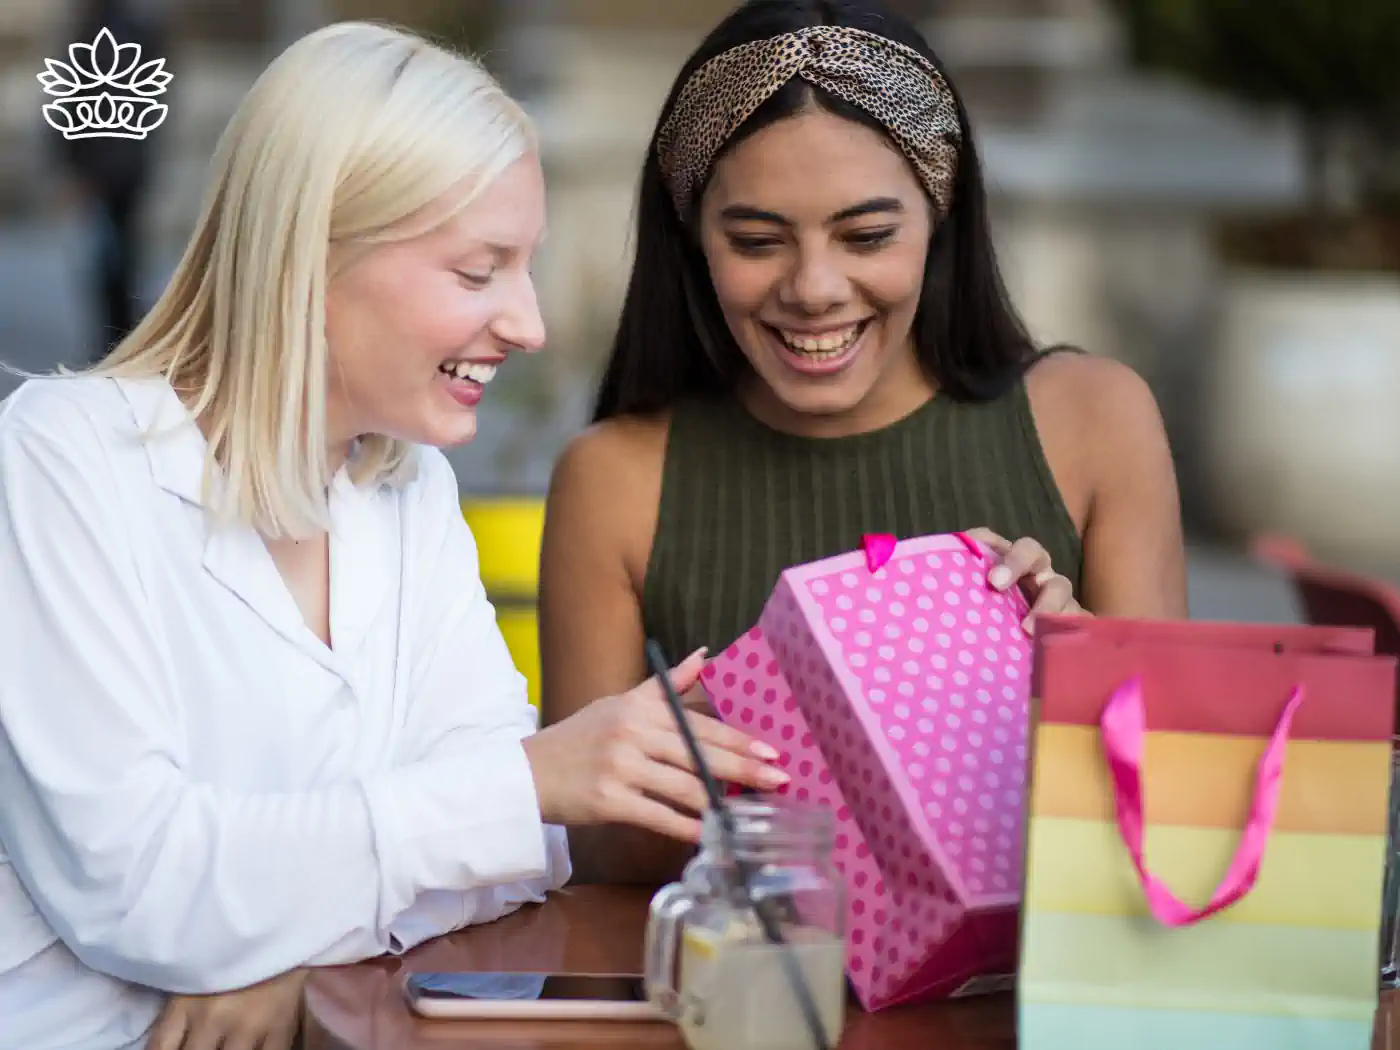 Two women smiling and laughing while opening a pink polka-dotted gift bag at a café. Fabulous Flowers and Gifts.